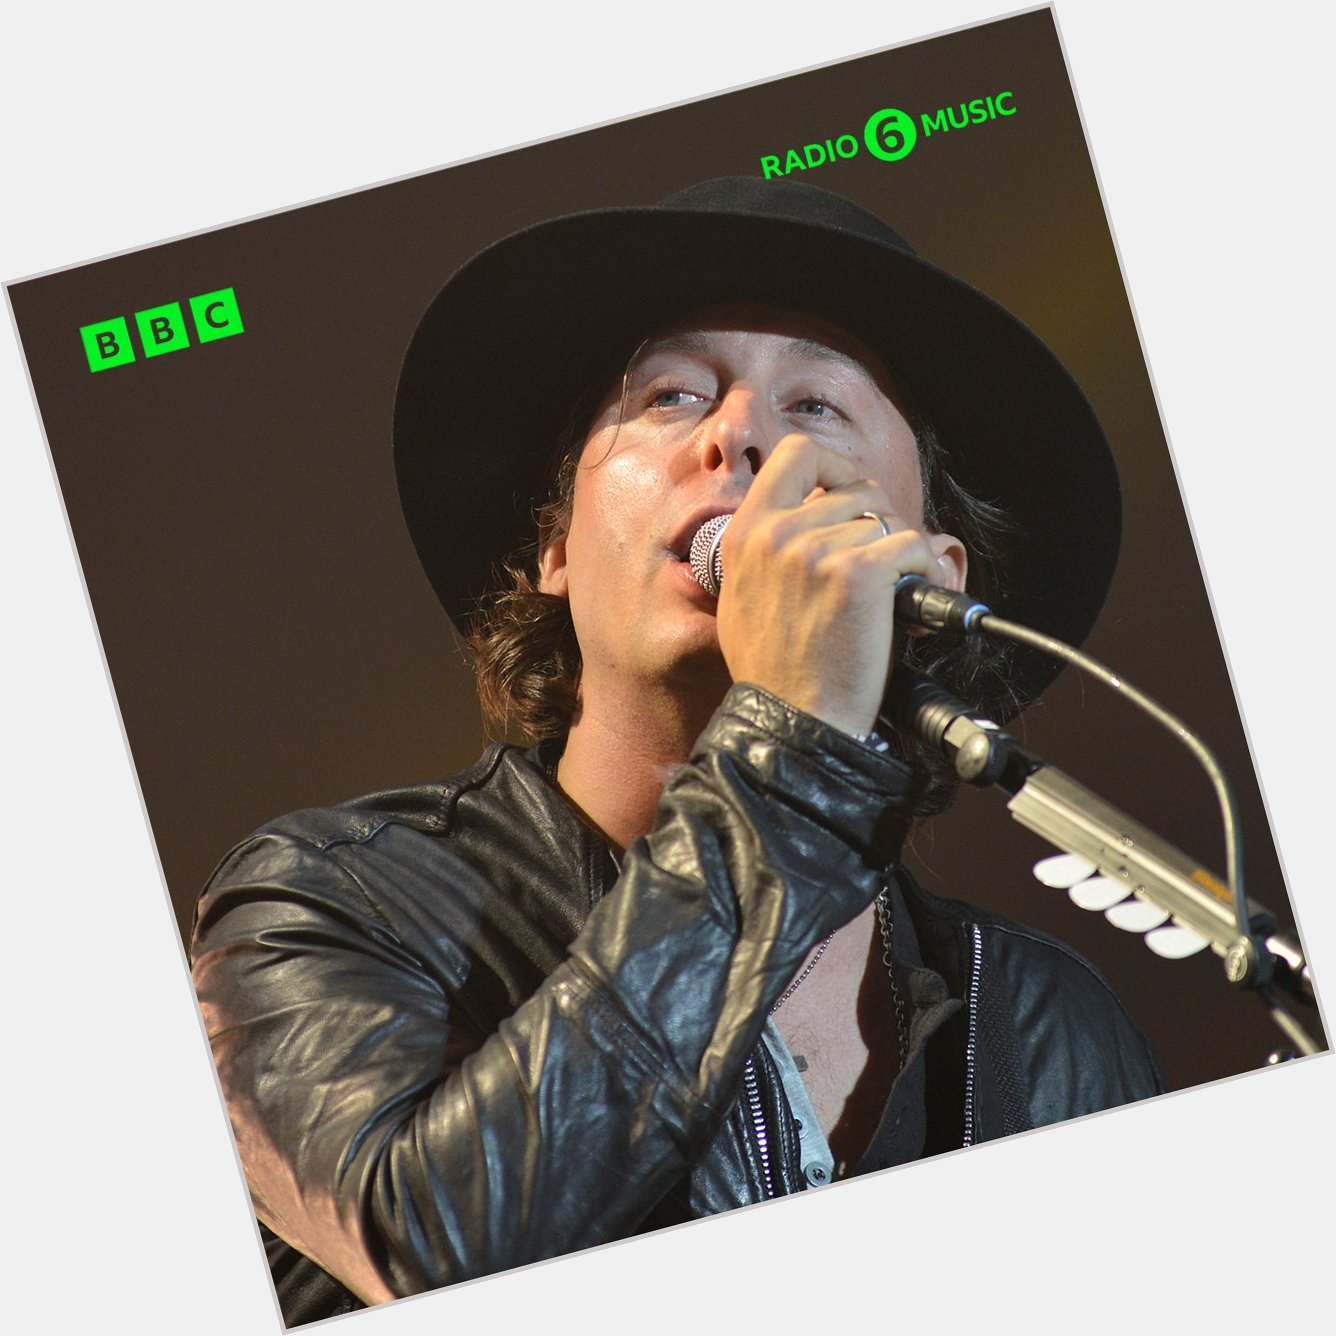 Happy Birthday Carl Barât From The Libertines to his solo work, what are your favourite tracks from Carl? 